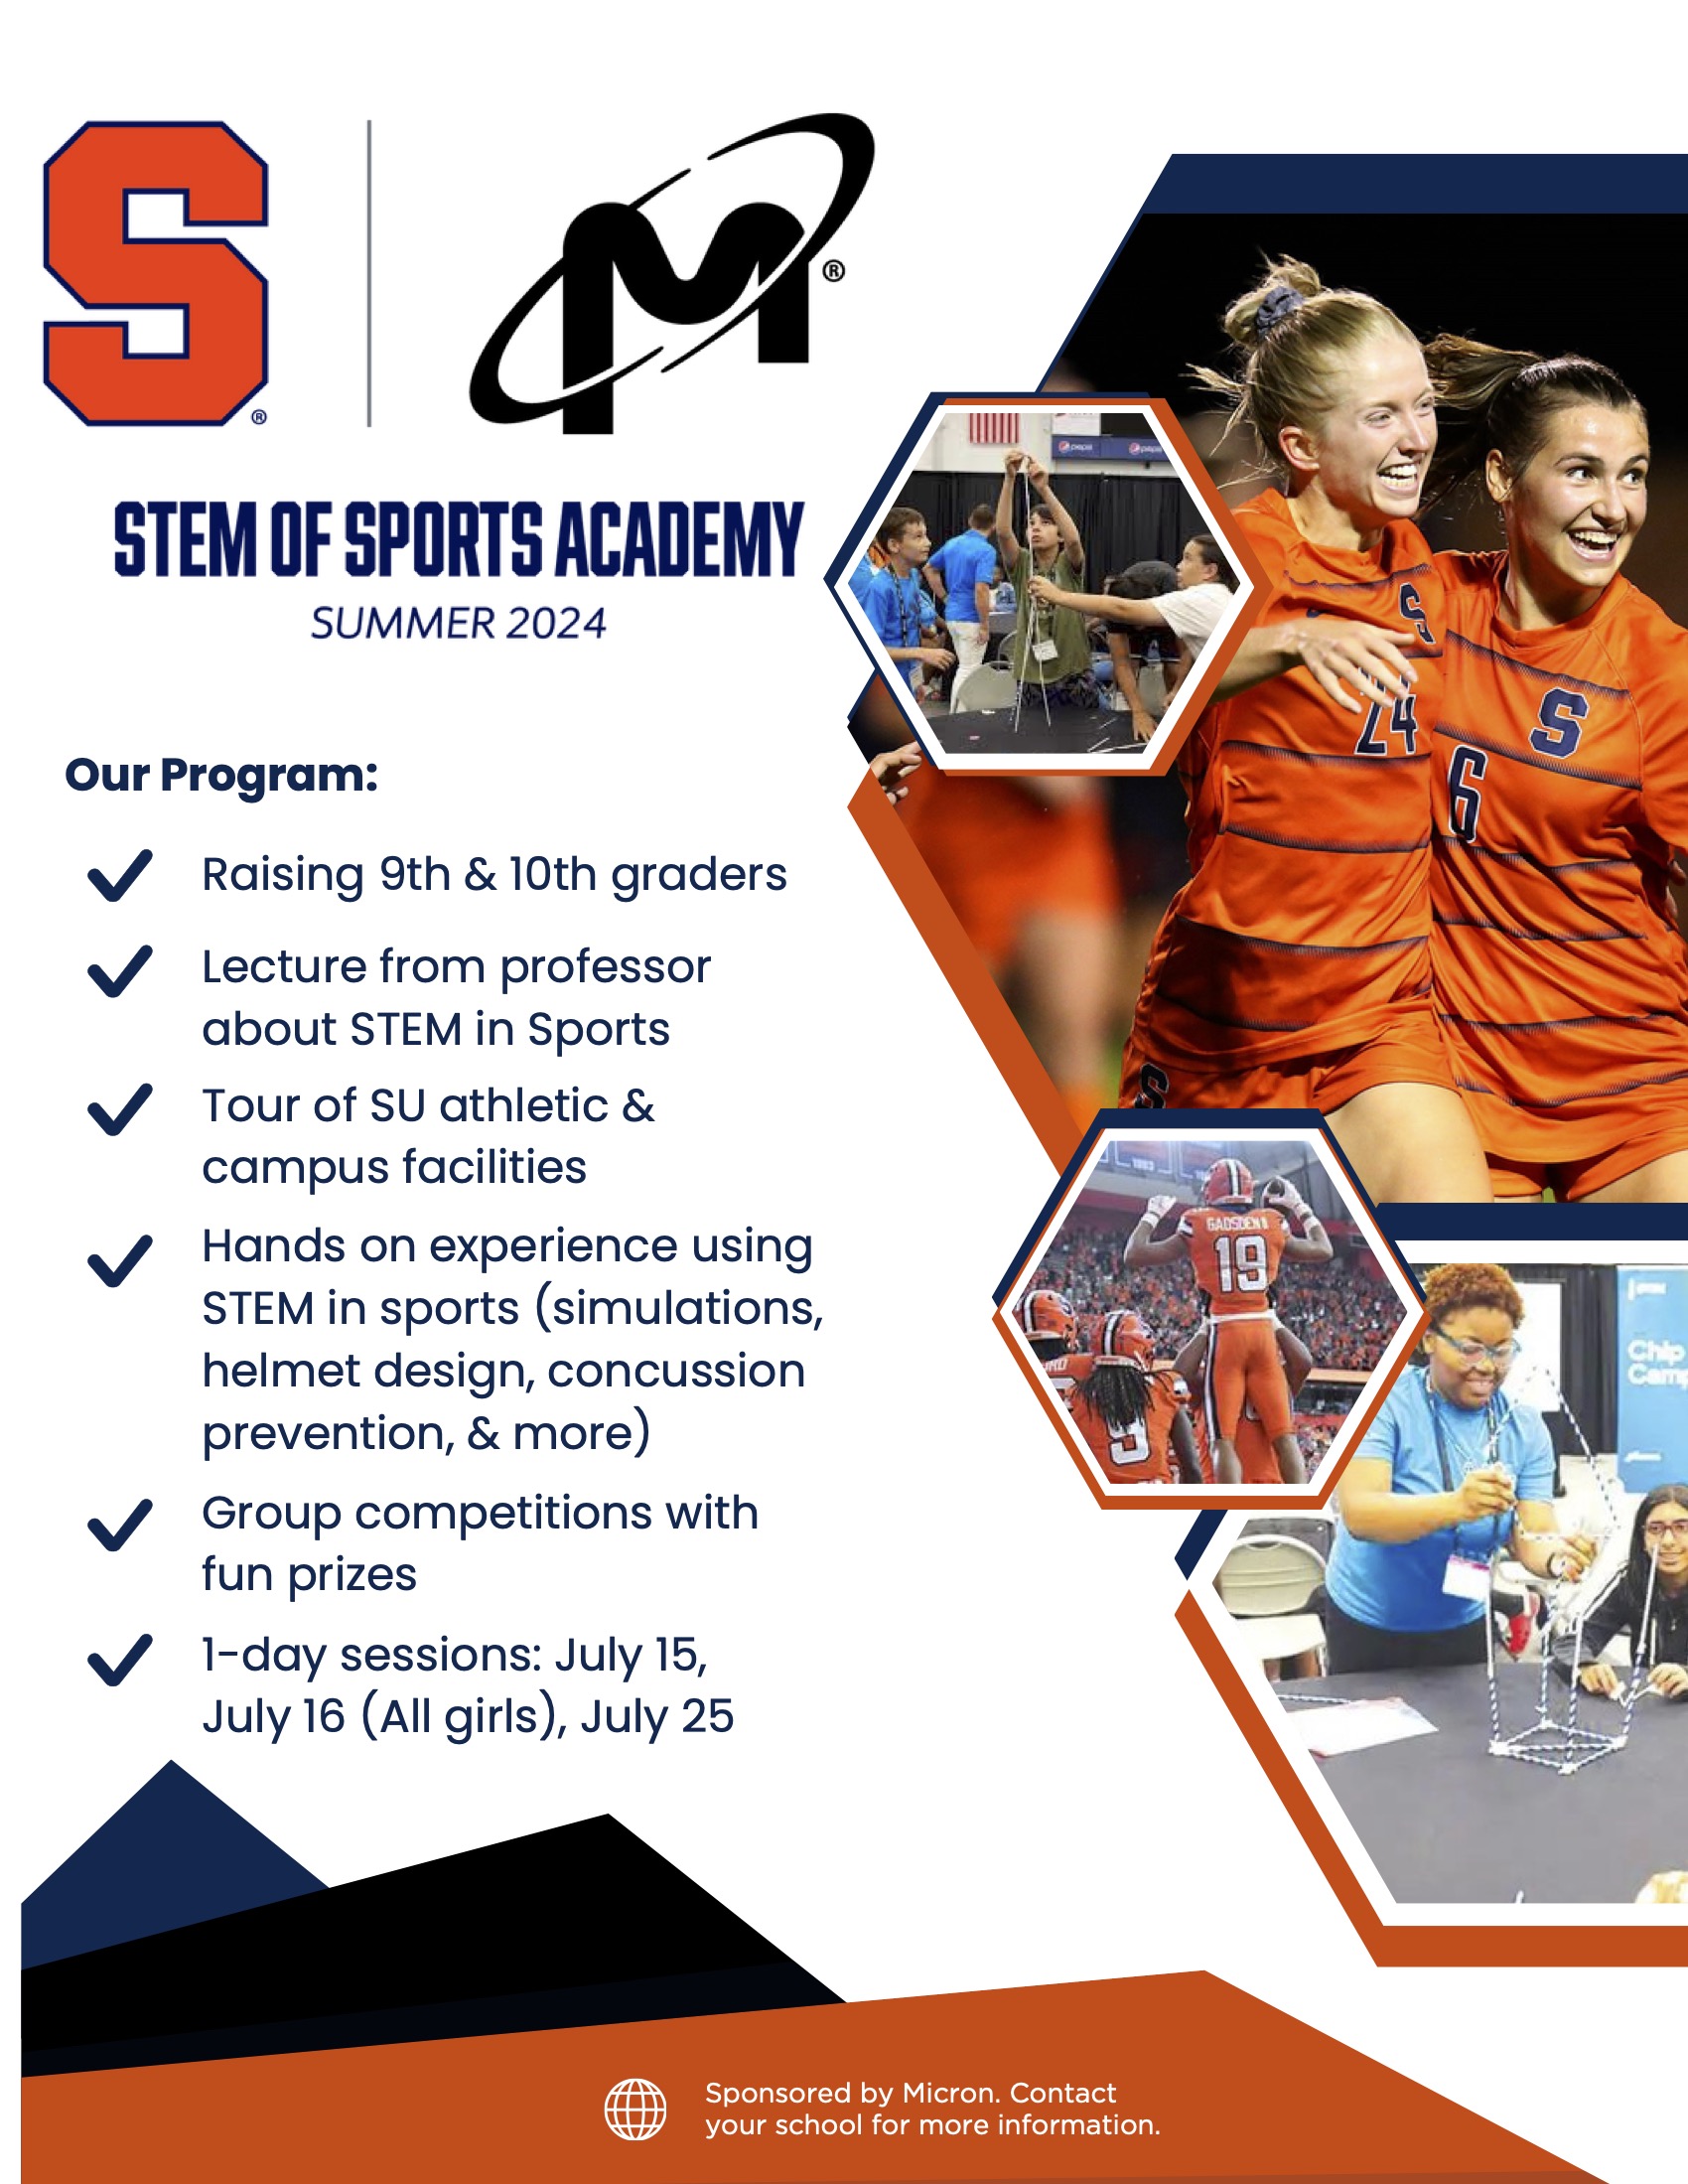 STEM  of Sports Academy Summer 2024 Our Program: Lecture from professor about STEM in Sports Tour of SU athletic & campus facilities Hands on experience using STEM in sports (simulations, helmet design, concussion prevention, & more) Sponsored by Micron. Contact your school for more information. 1-day sessions: July 15, July 16 (All girls), July 25